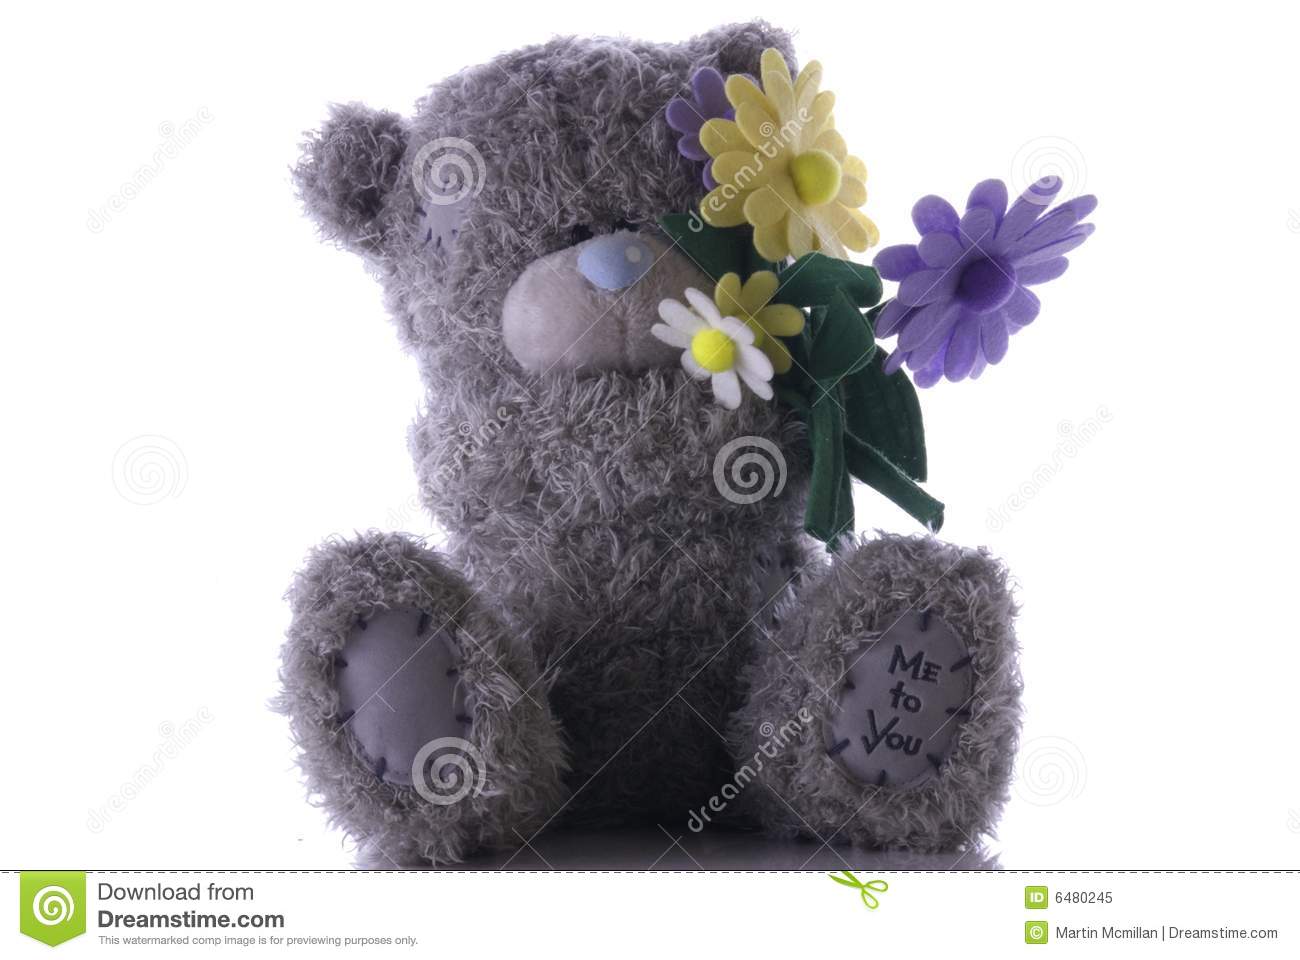 Image Of A Blue Nose Bear Holding Up A Bunch Of Flowers